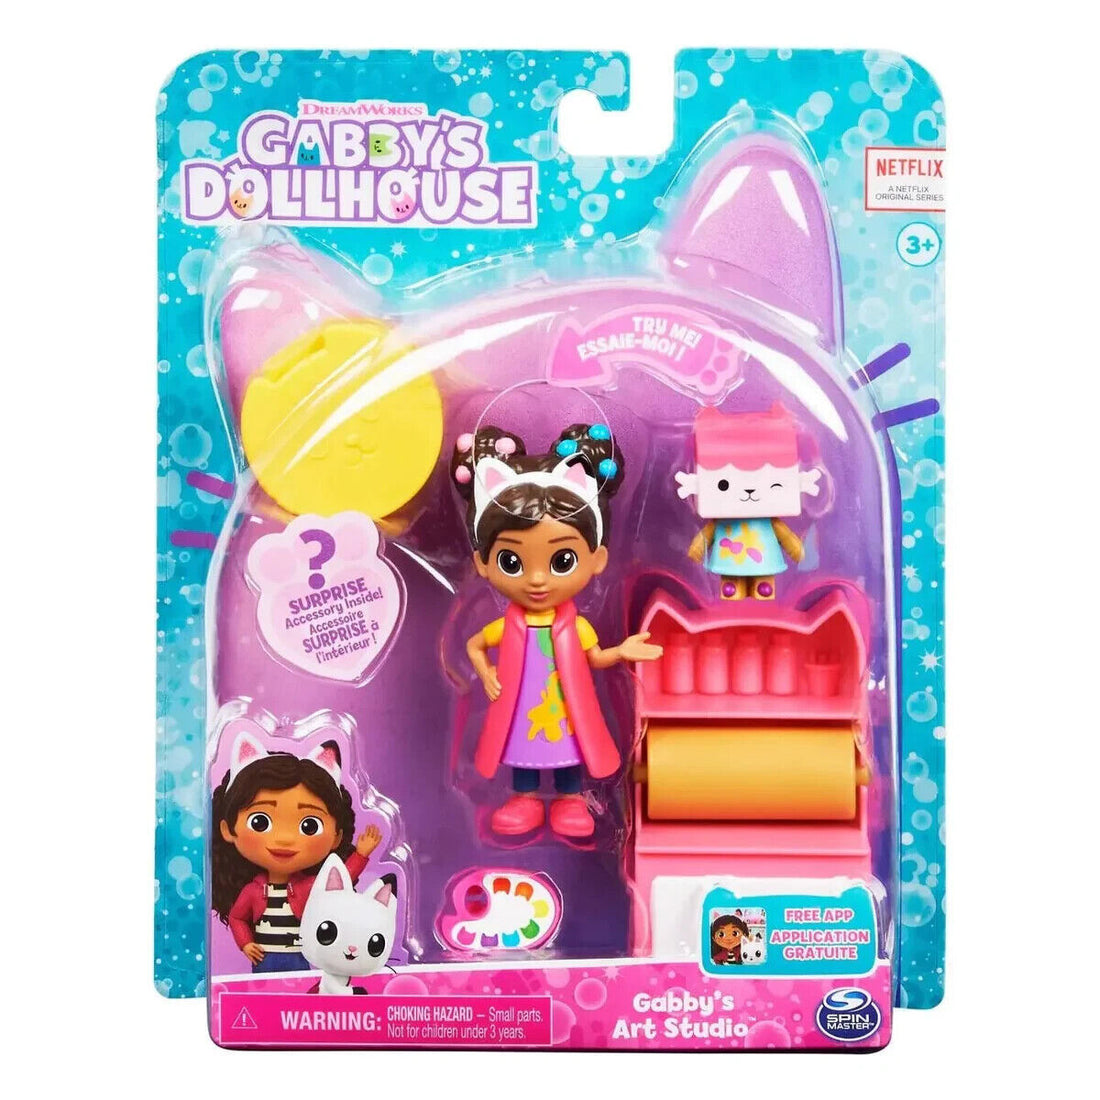 Gabby Dollhouse & Soft Toys, Vehicles, Playsets - Your Child's Dream Playtime! - Art Studio Set w/ 2 Toy Figures